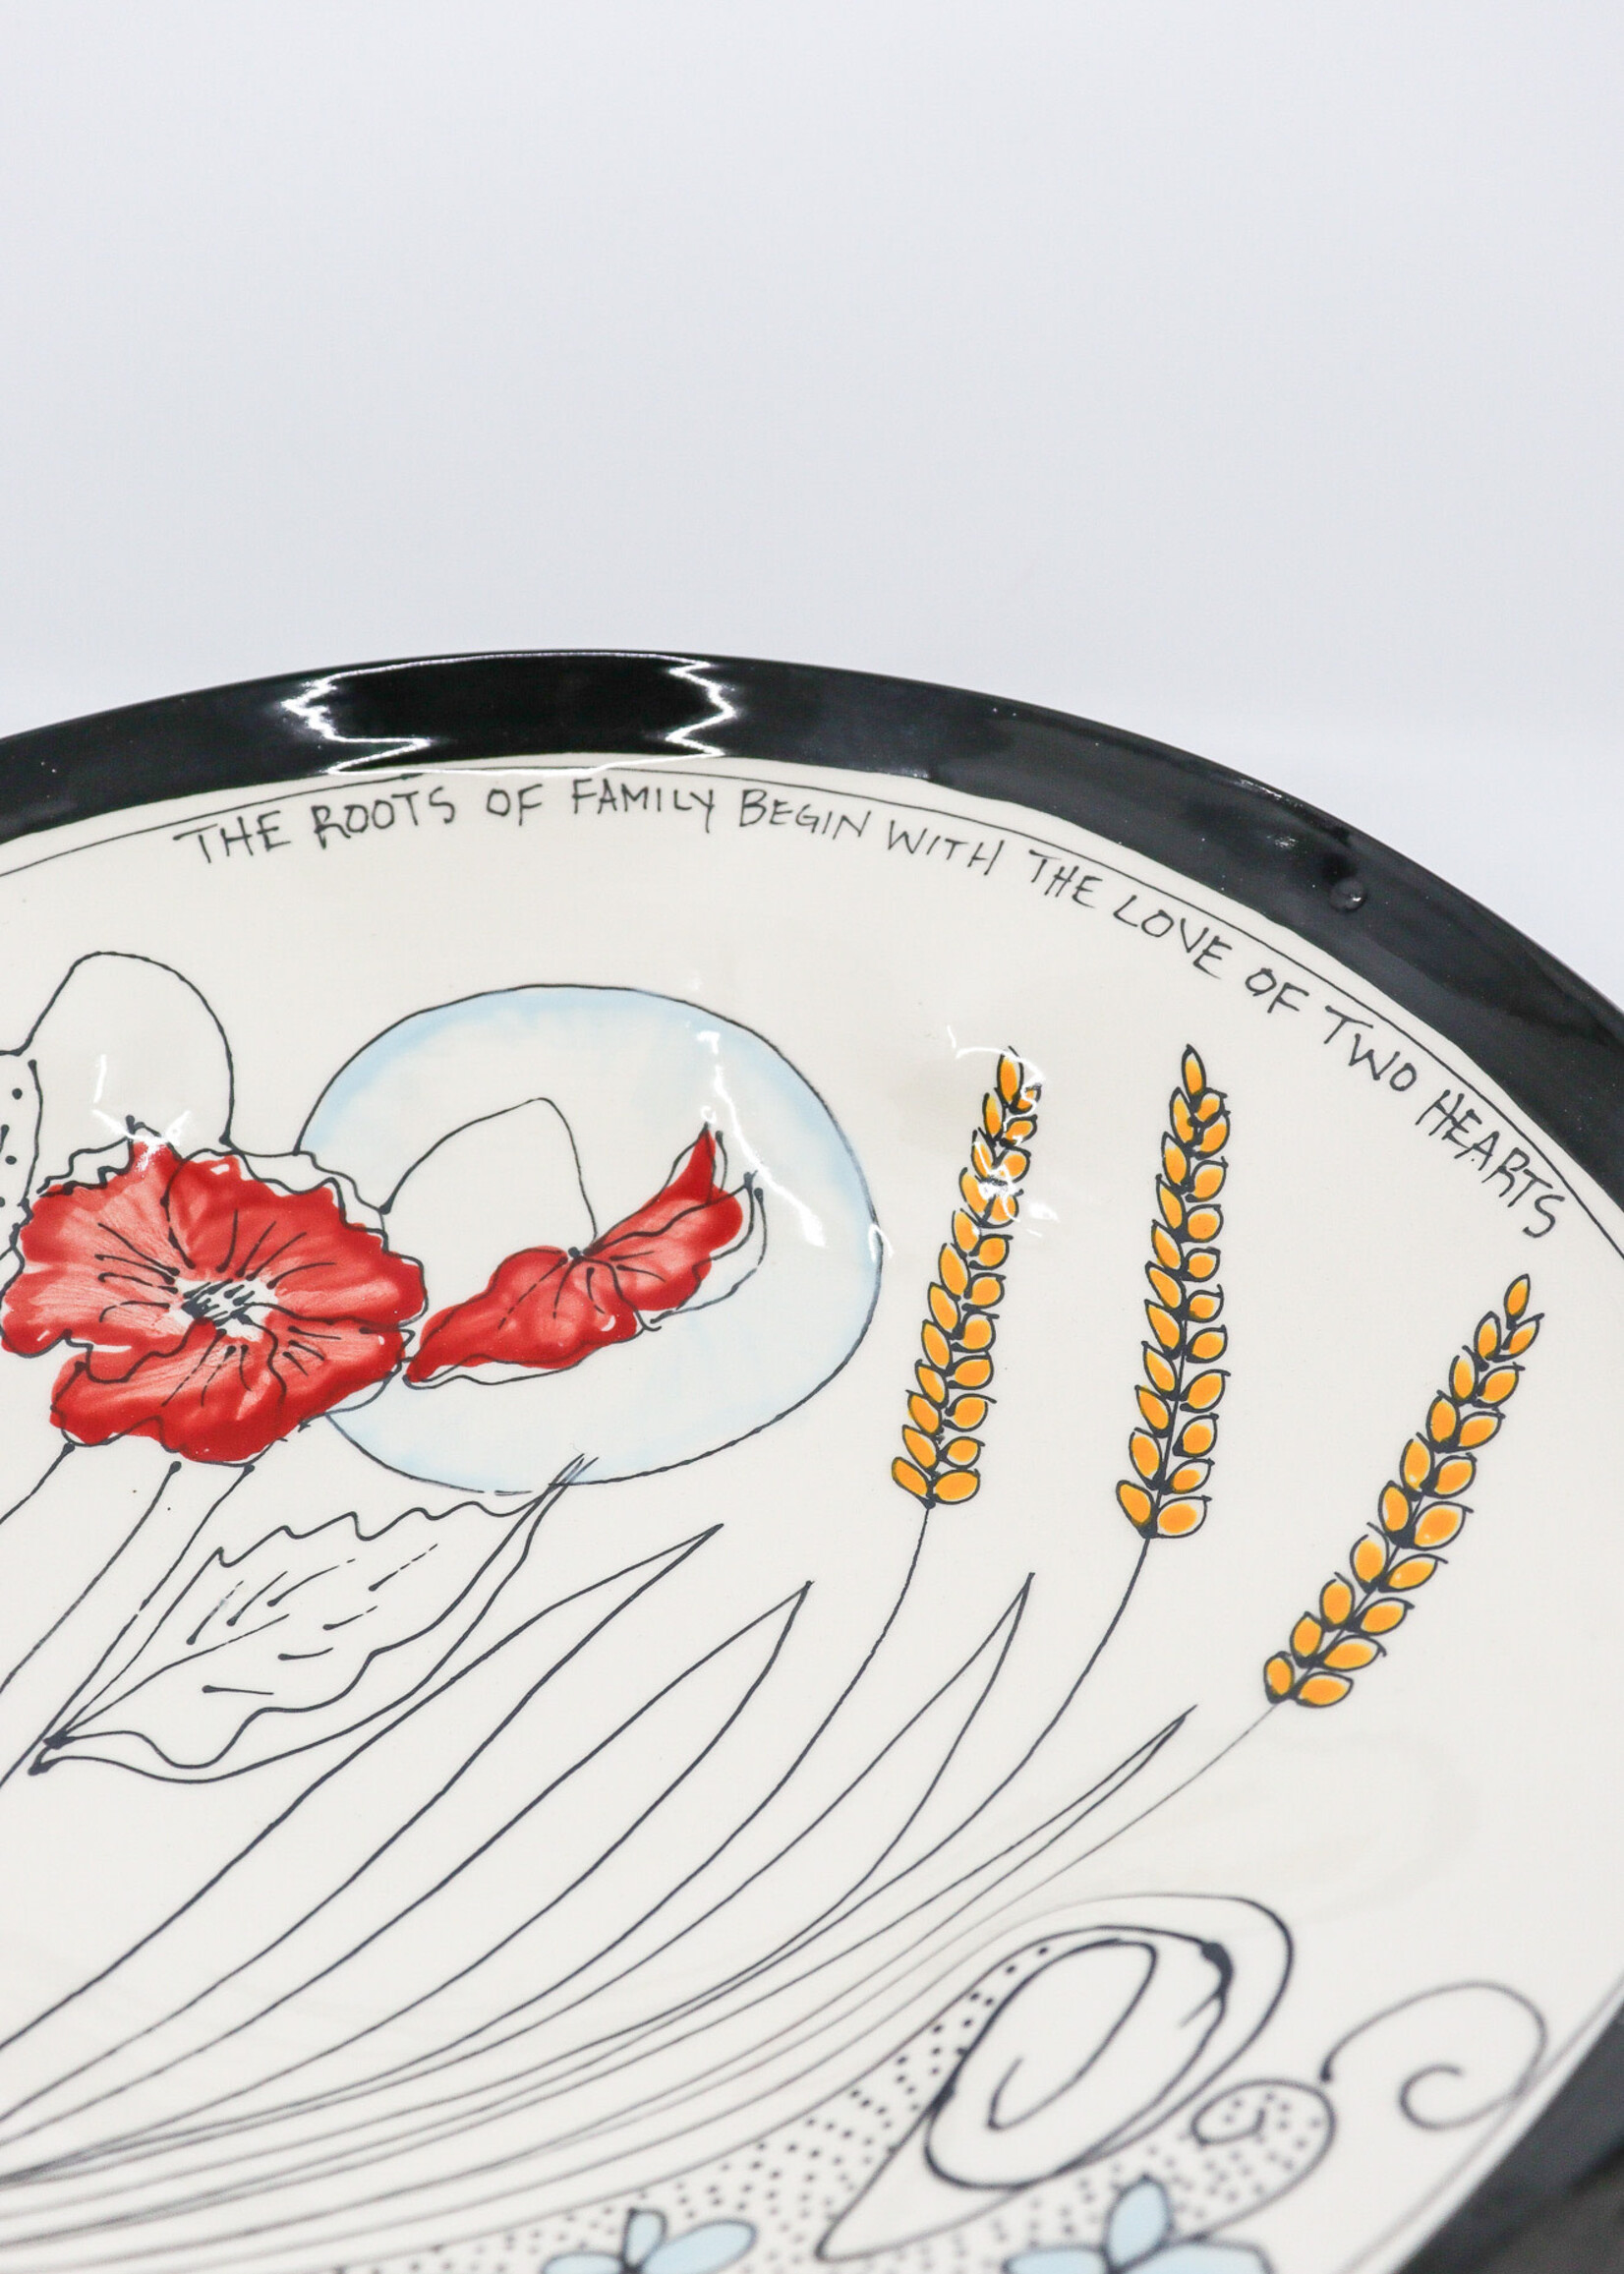 CERAMICS - 12" Bowl, Poppies and Wheat, "The Roots of Family Begin with The Love of Two Hearts"